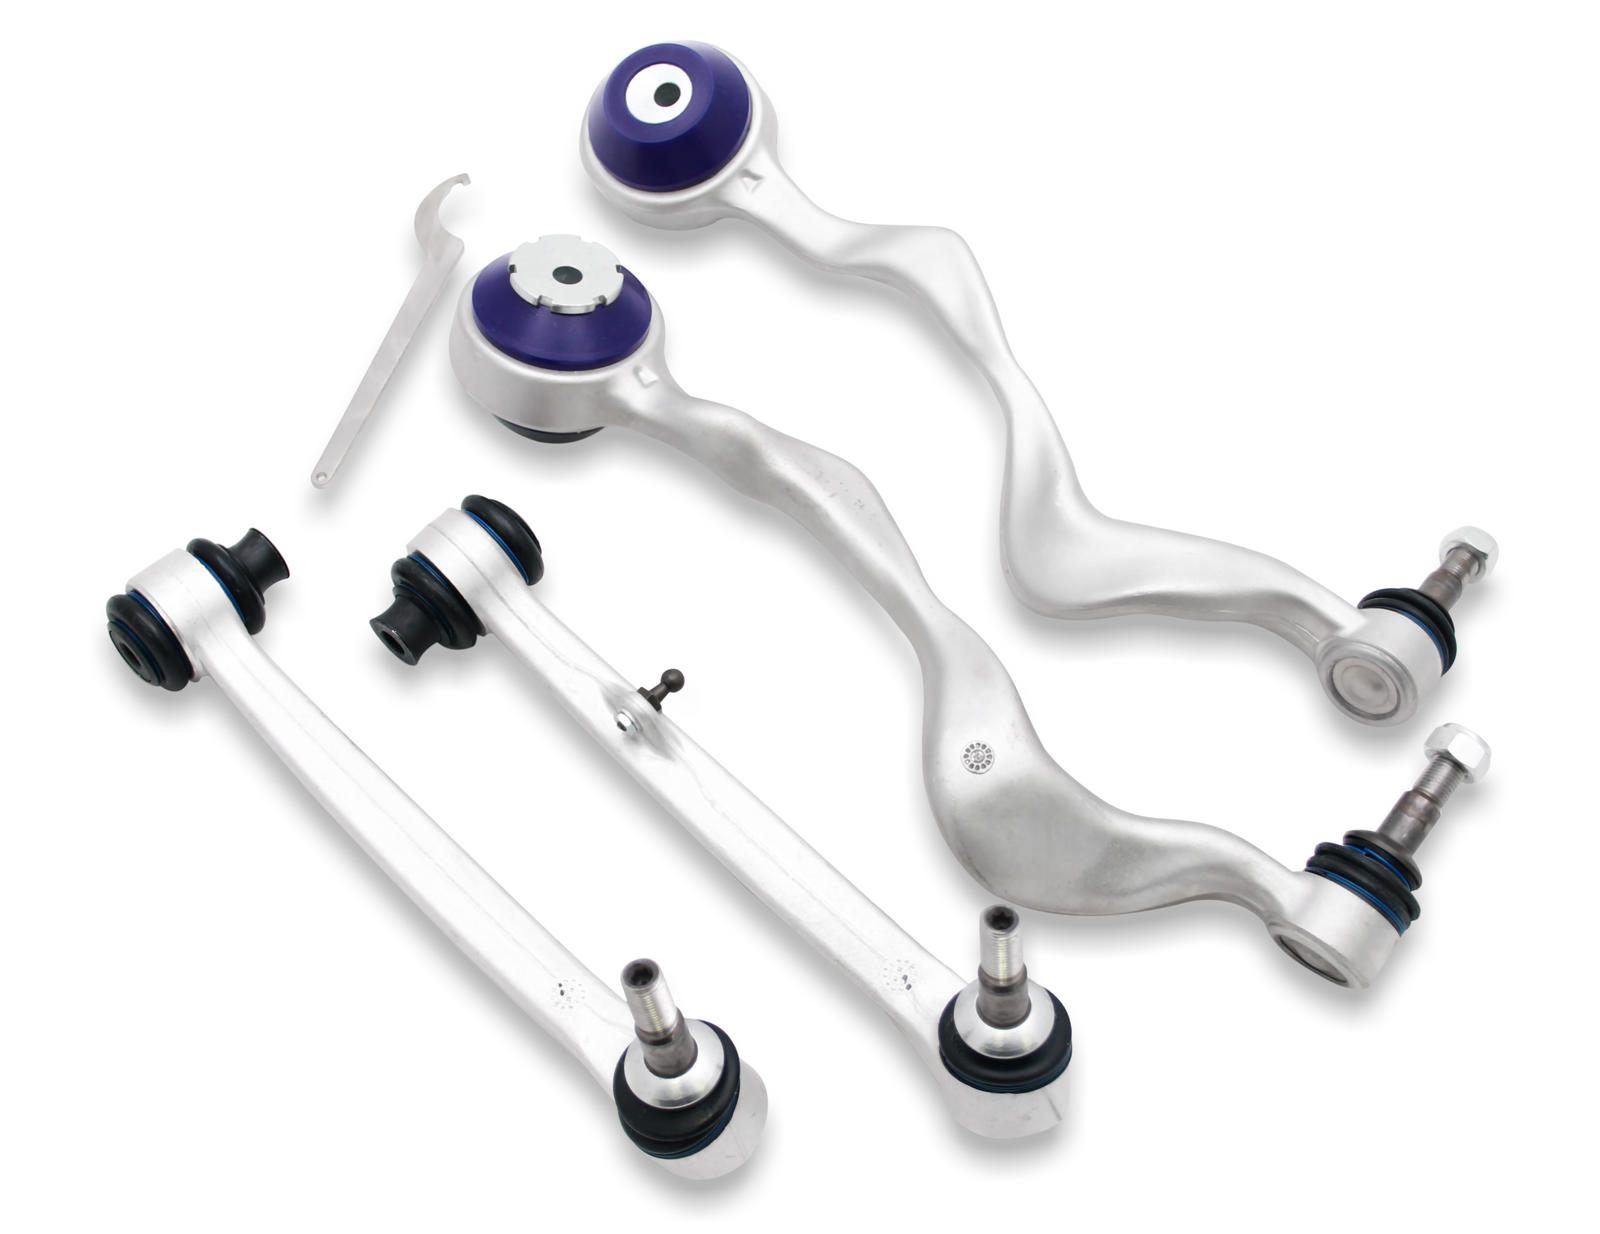 Front Control & Radius Alloy Performance Arm Kit including Ball Joints to suit BMW Vehicles